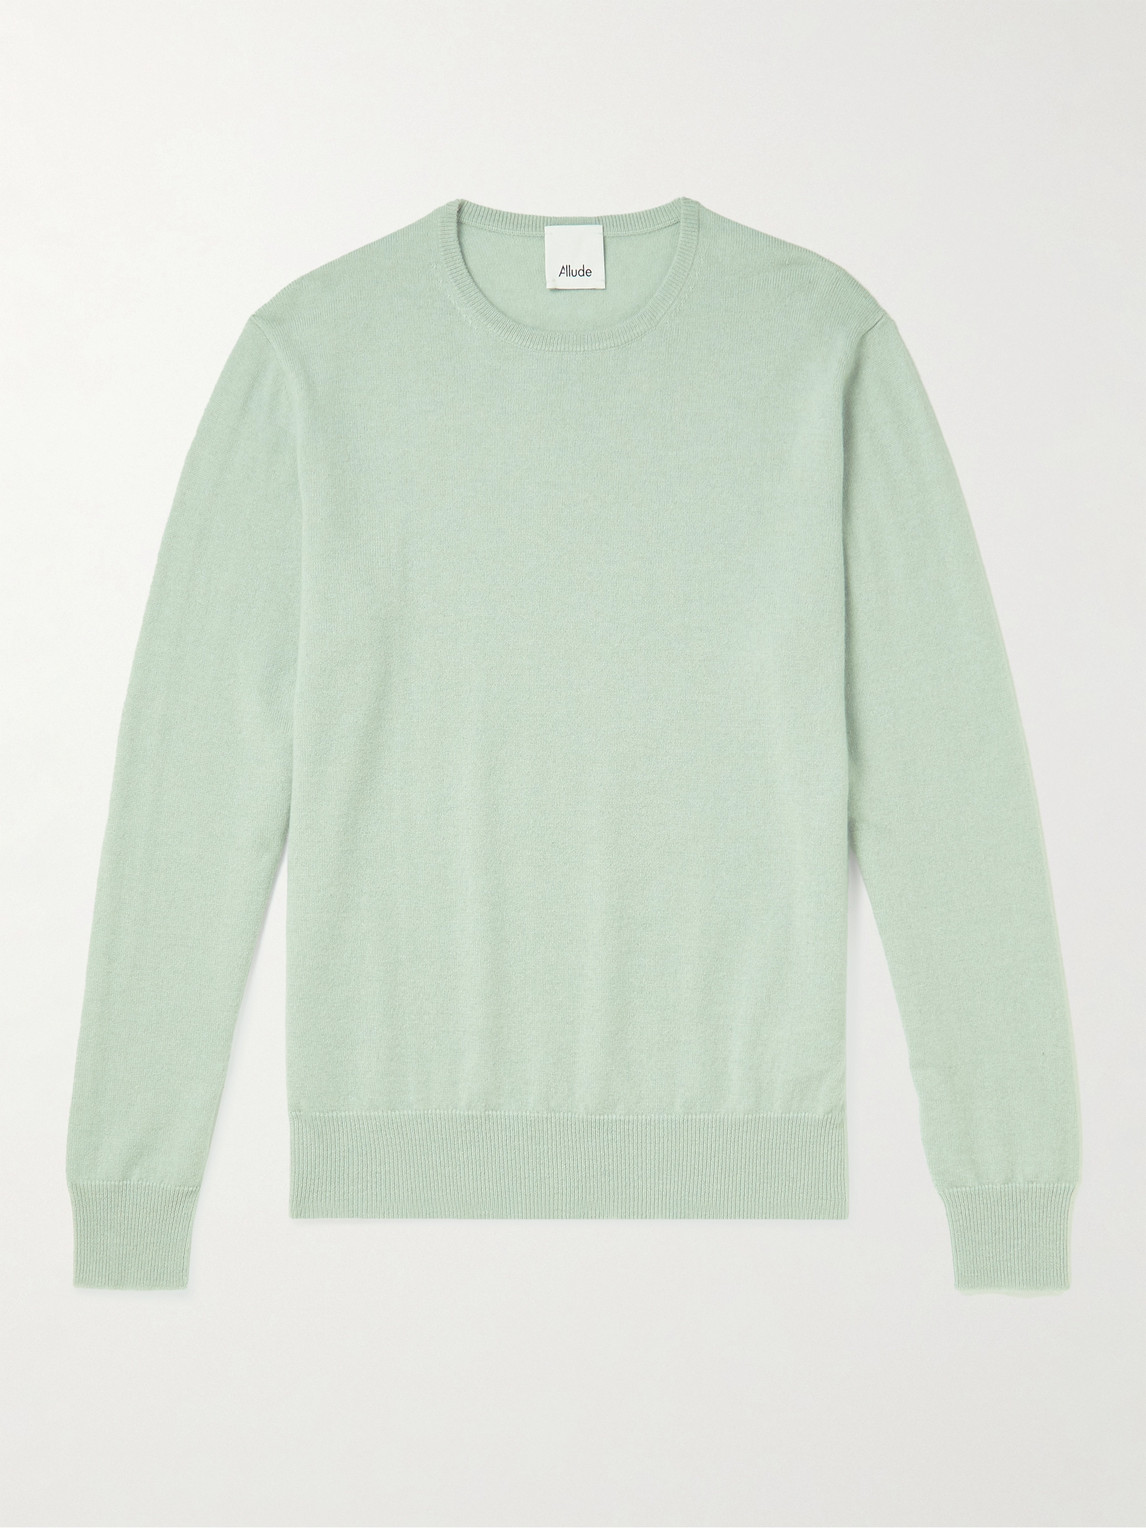 Allude Cashmere Sweater In Green